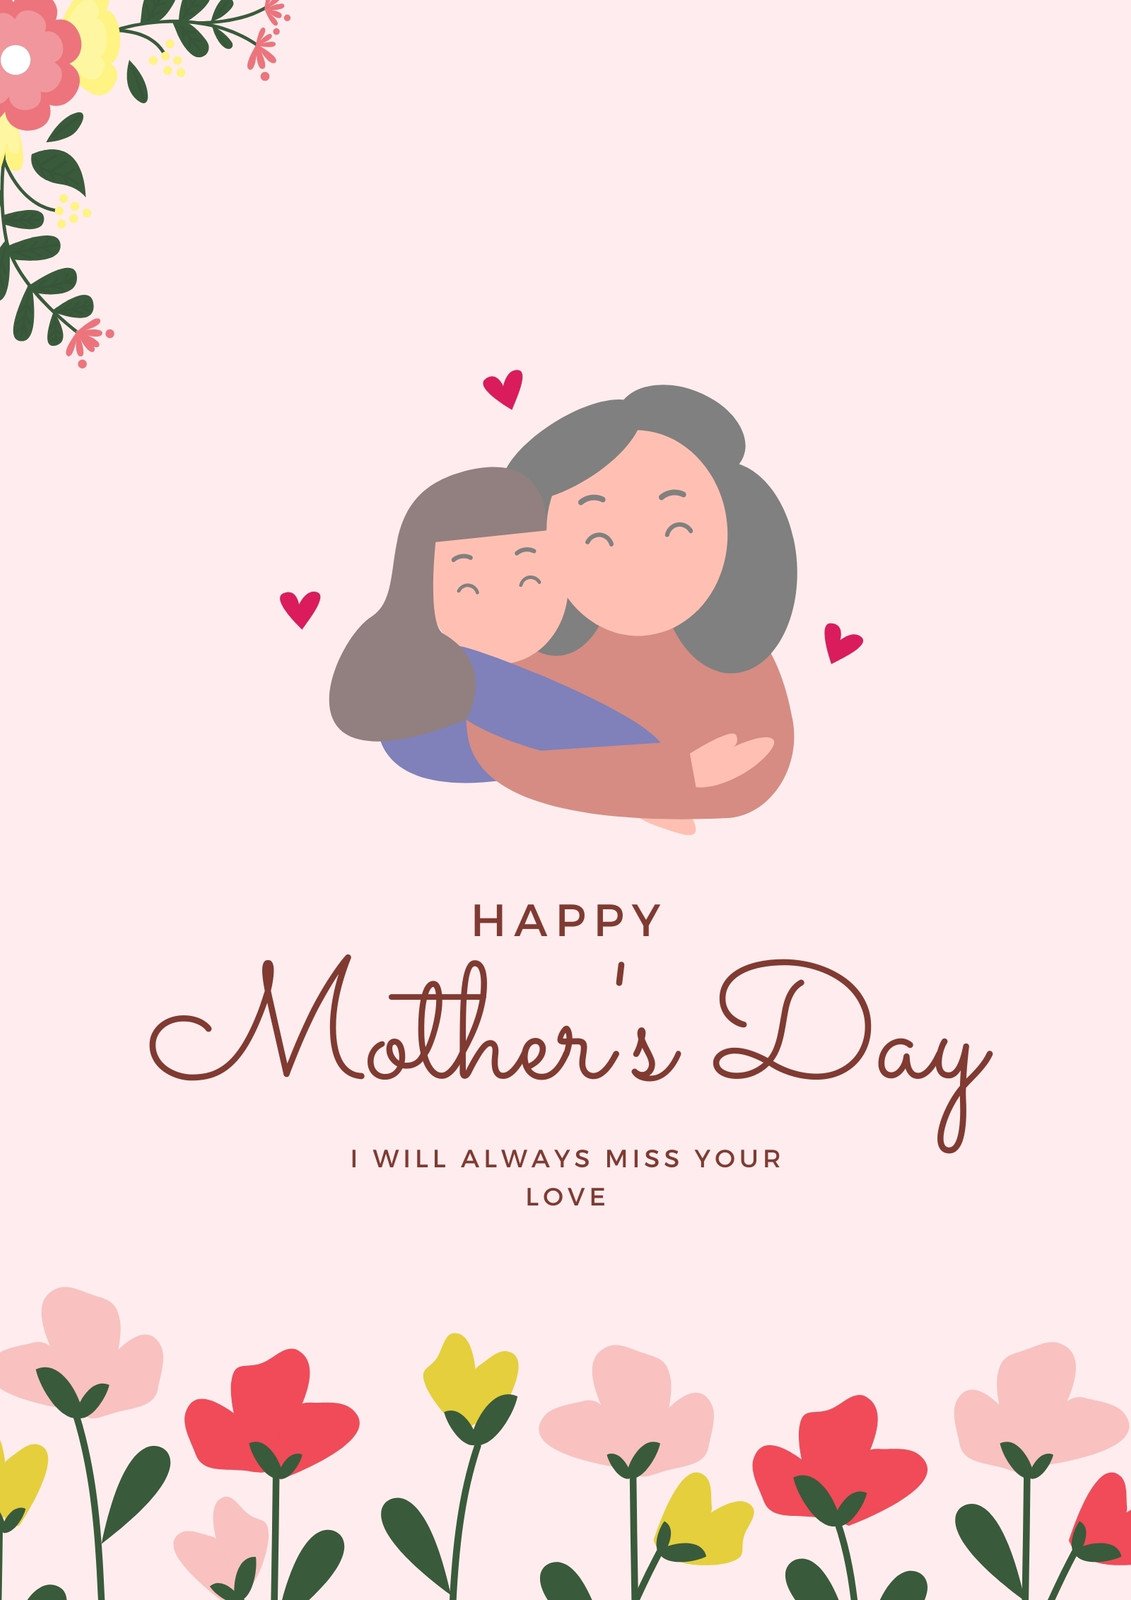 Customize 1,513+ Mother's Day Flyers Templates Online - Canva